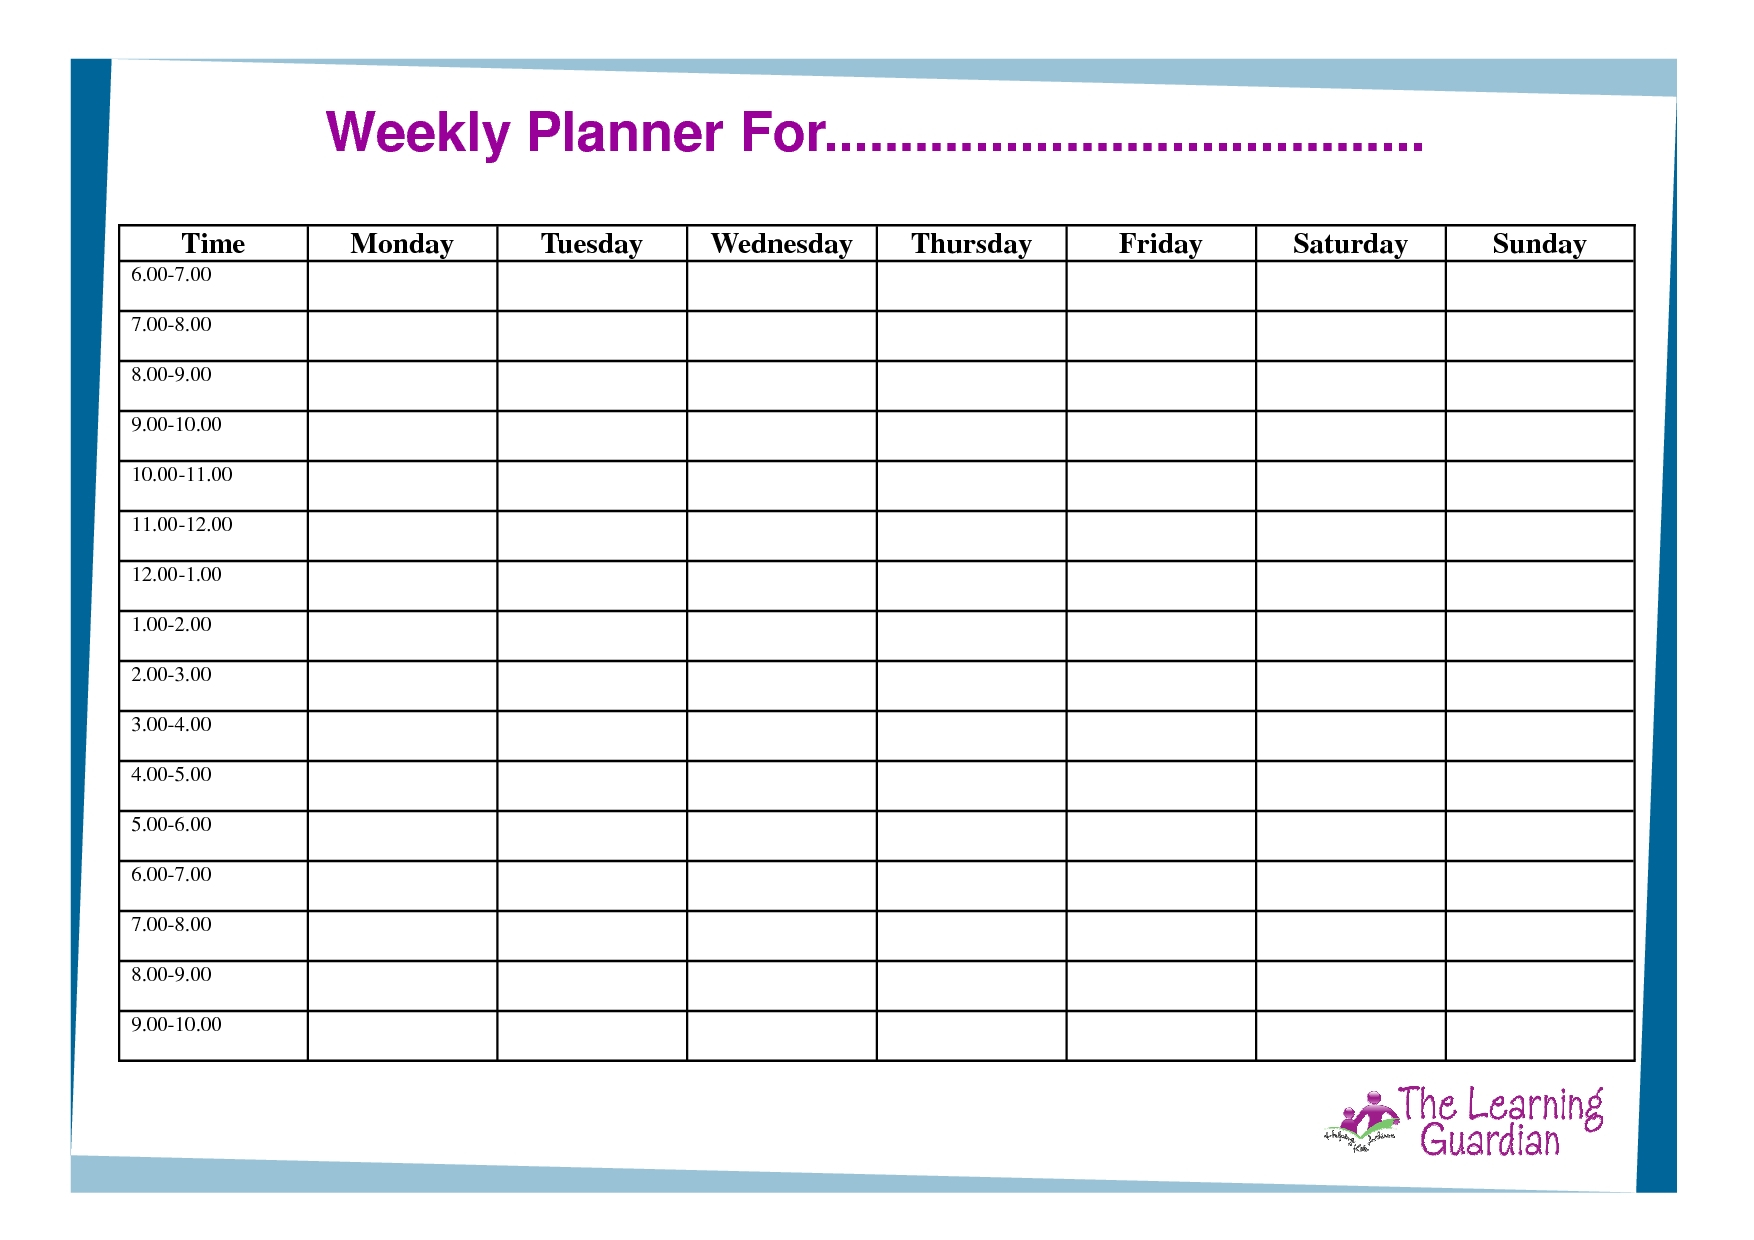 Monday To Friday Schedule Printable  Calendar Inspiration for Monday Through Friday Weekly Calendar Template